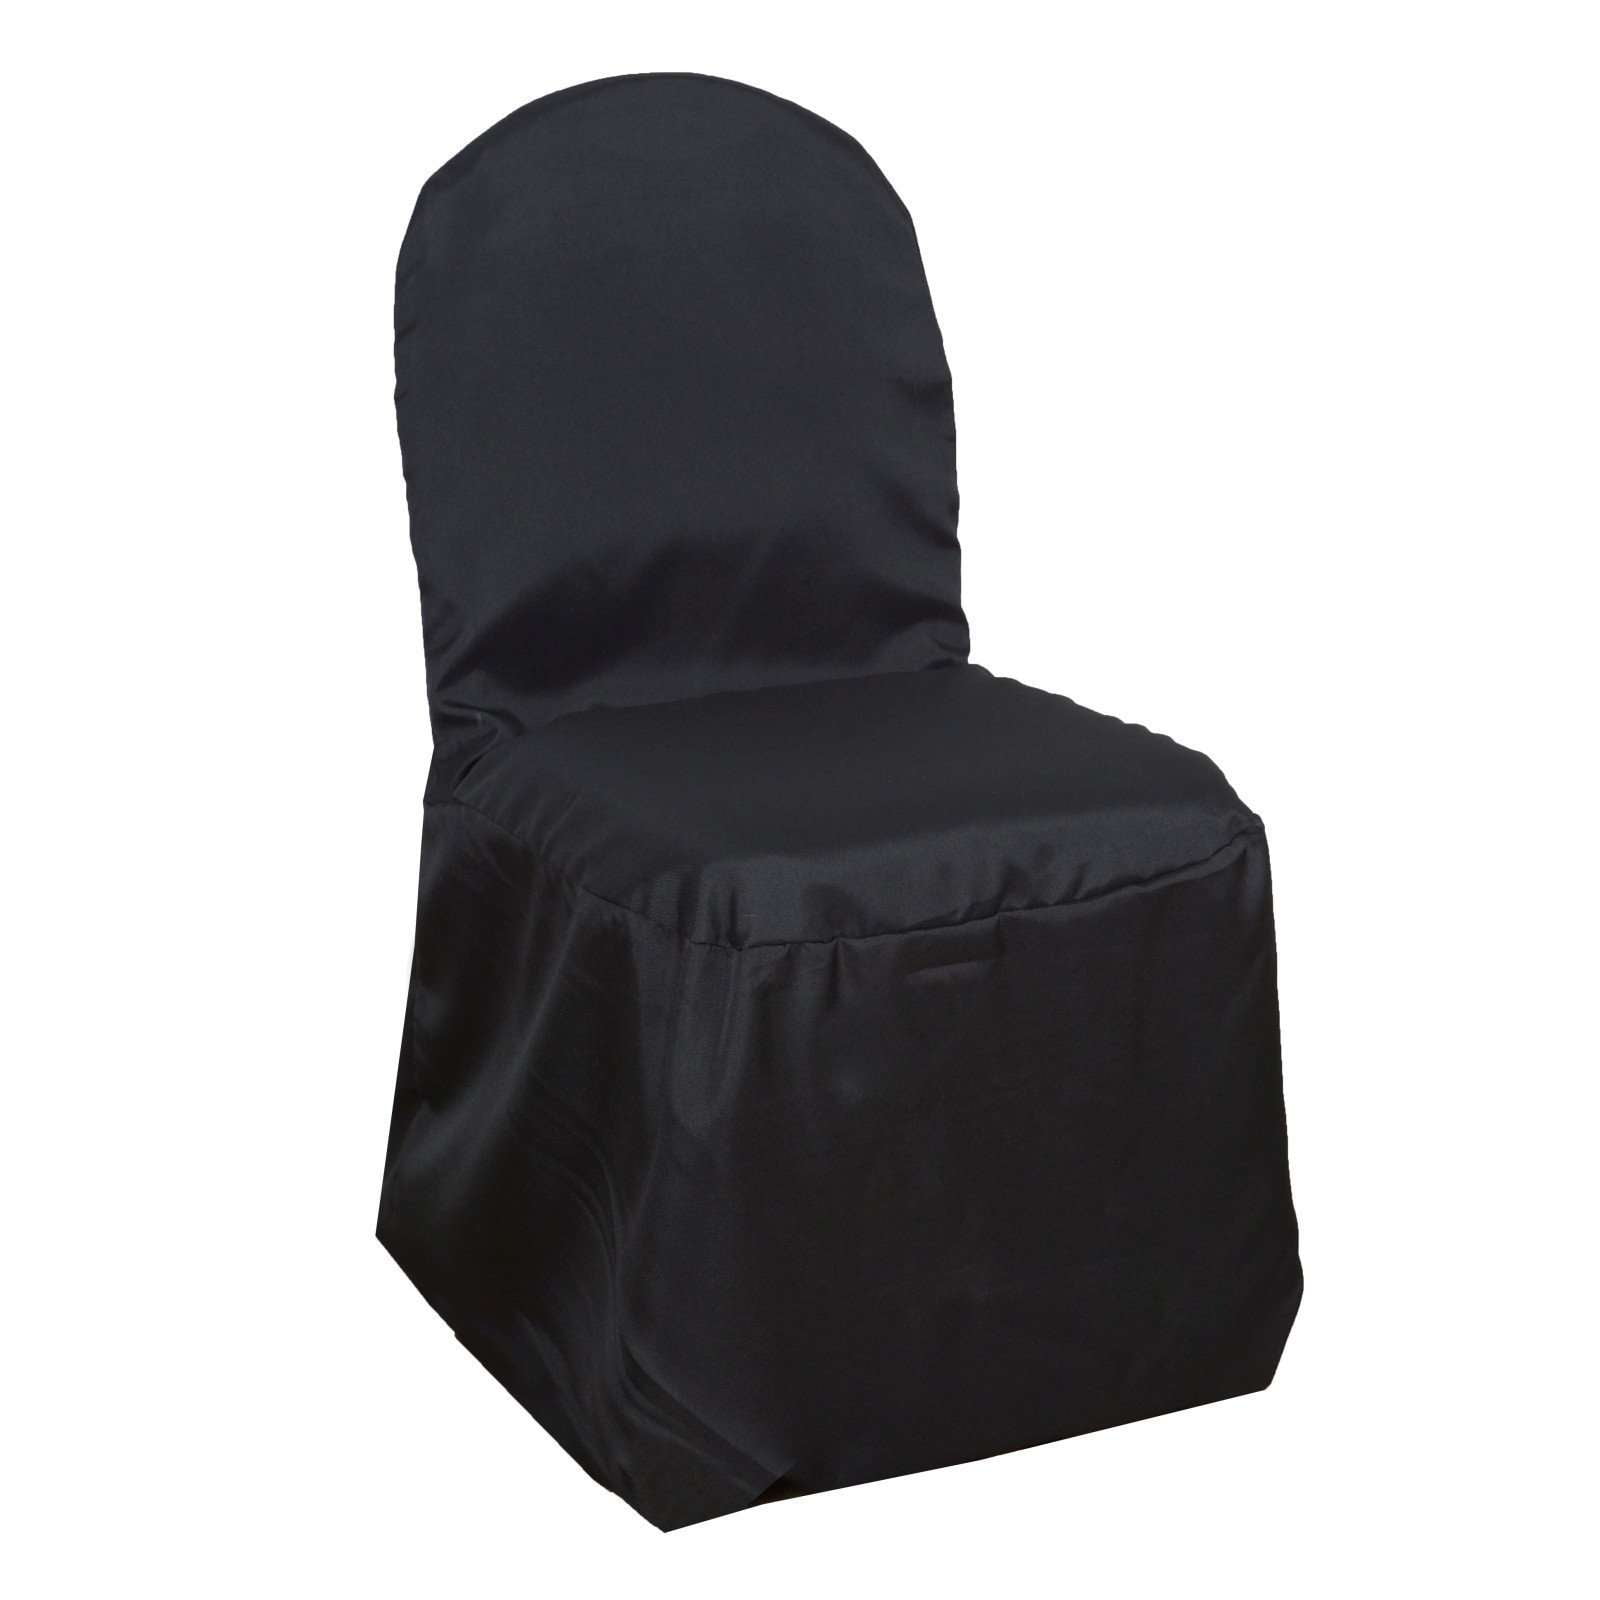 100 Polyester Banquet Chair Covers Wedding Reception Party Decorations 3 Colors! 